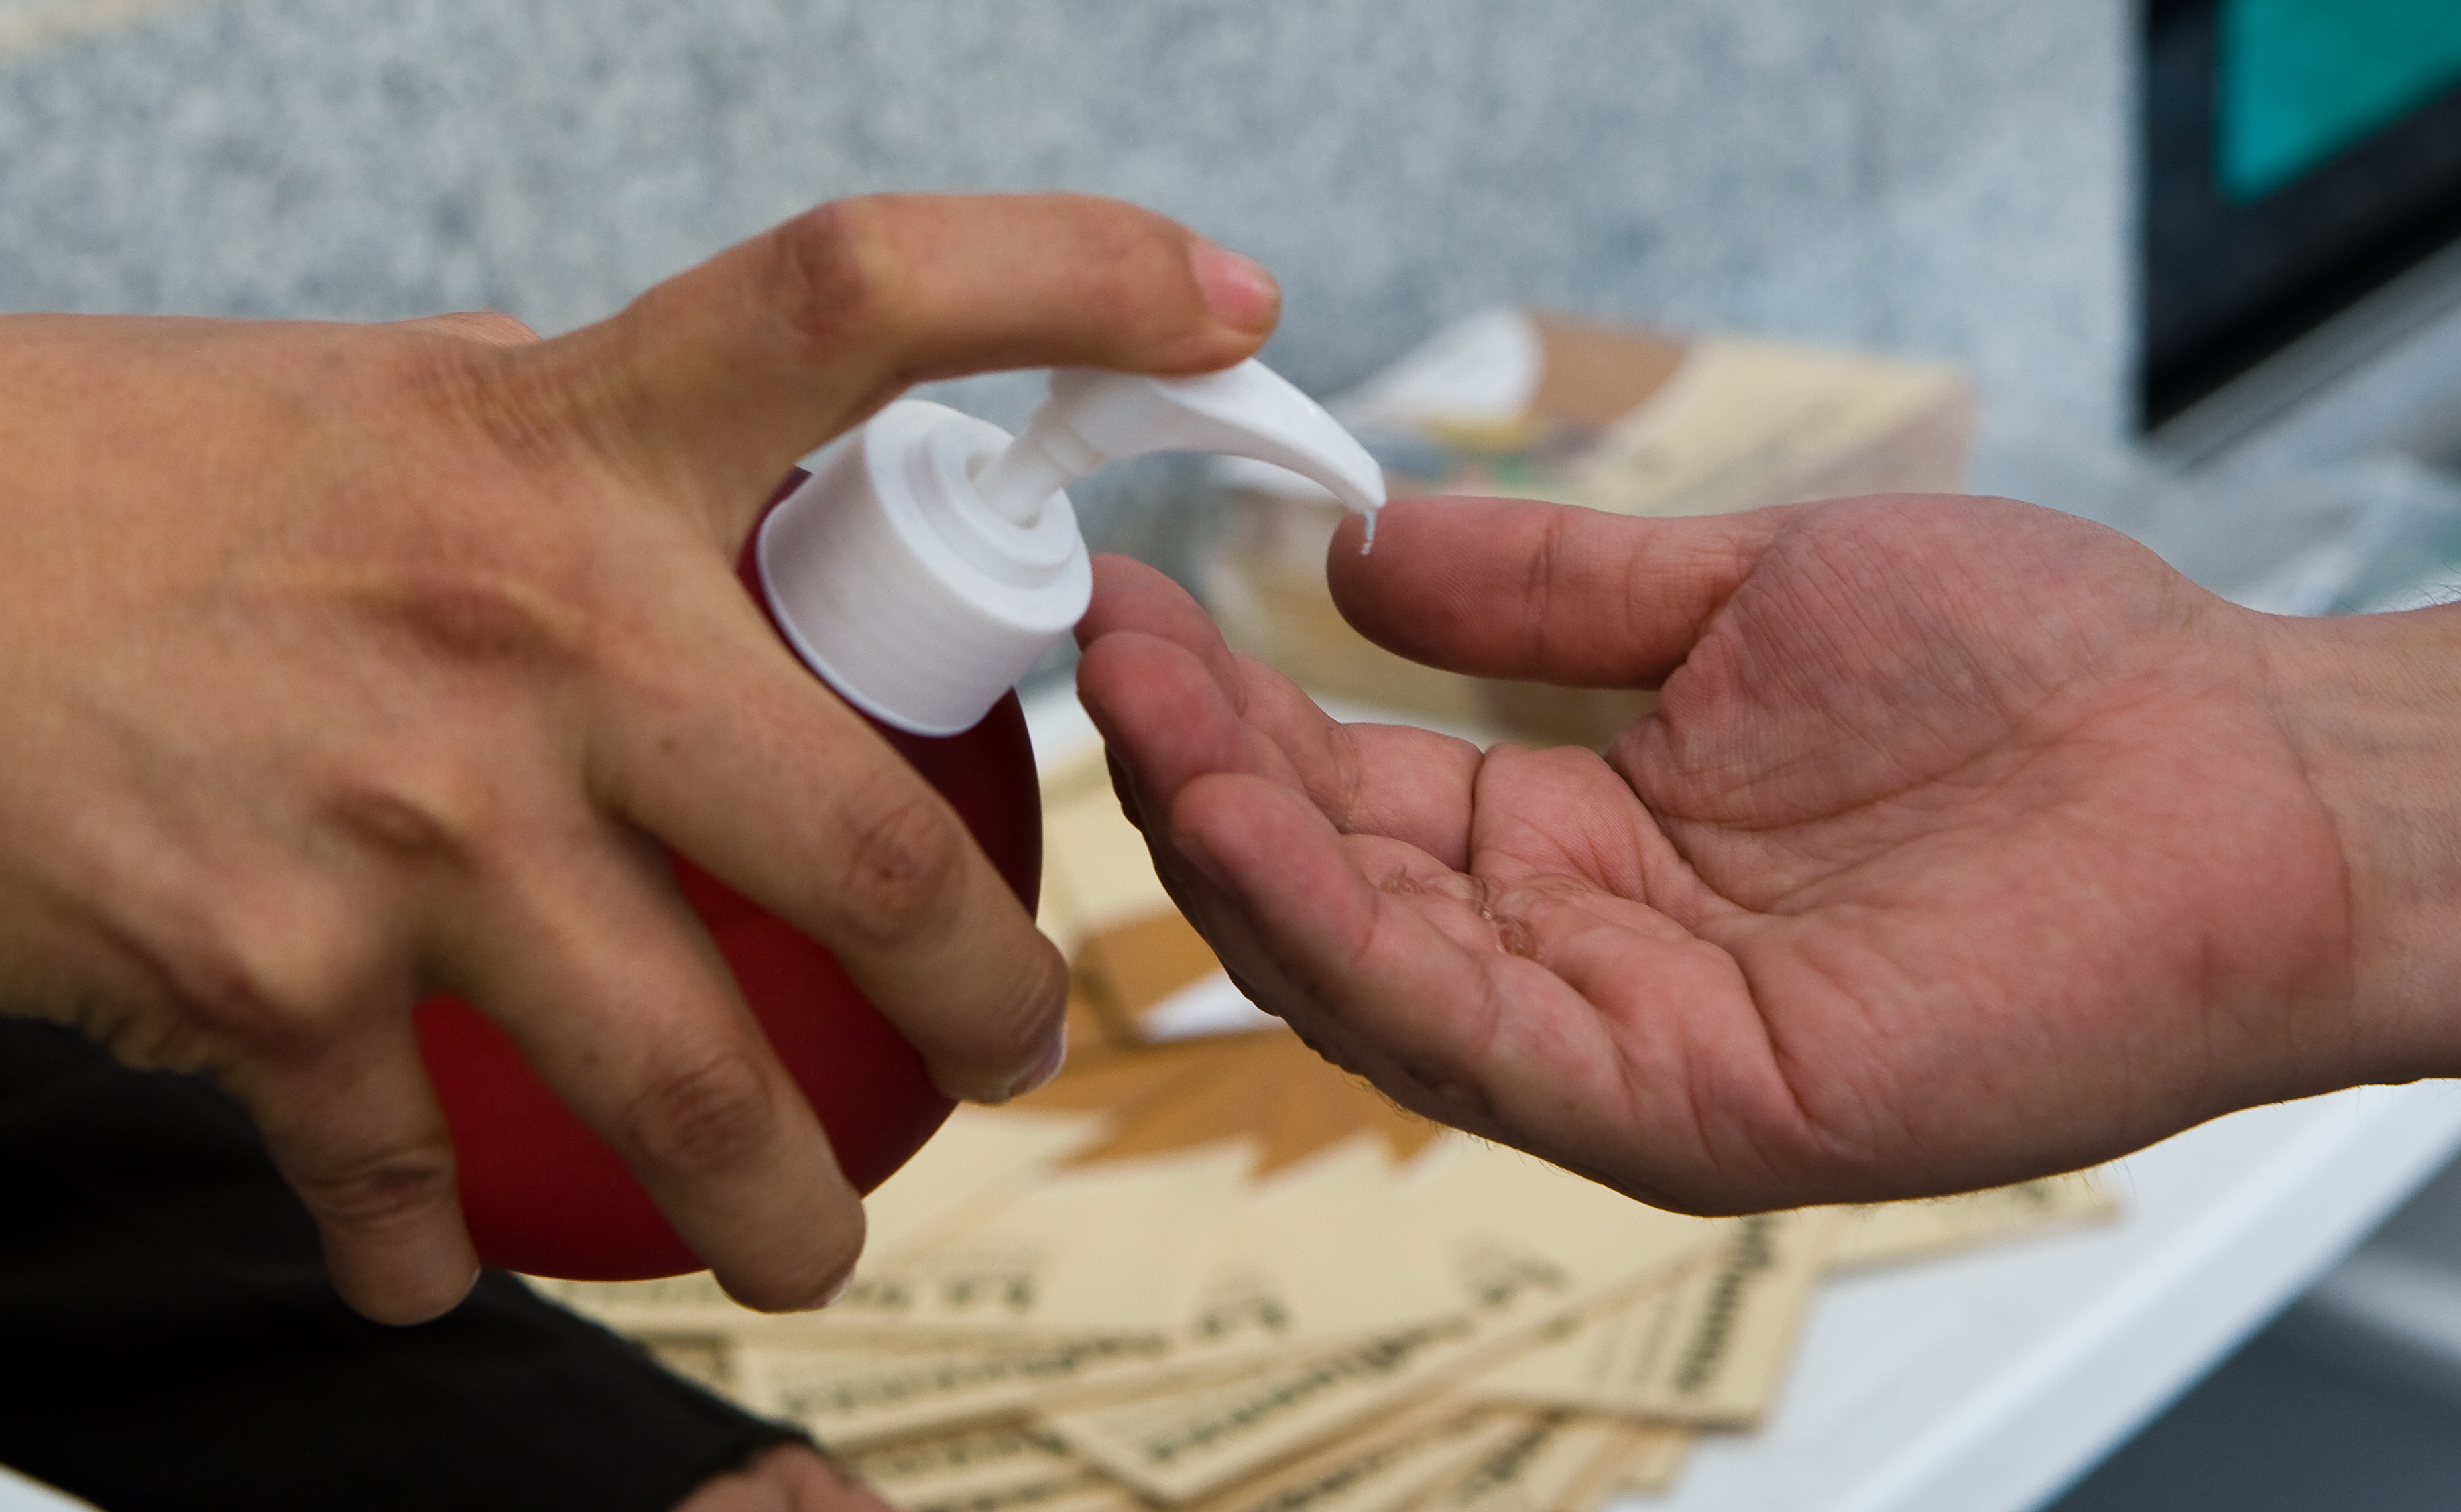 FDA finds new toxic hand sanitizer ingredient expands warning to 157